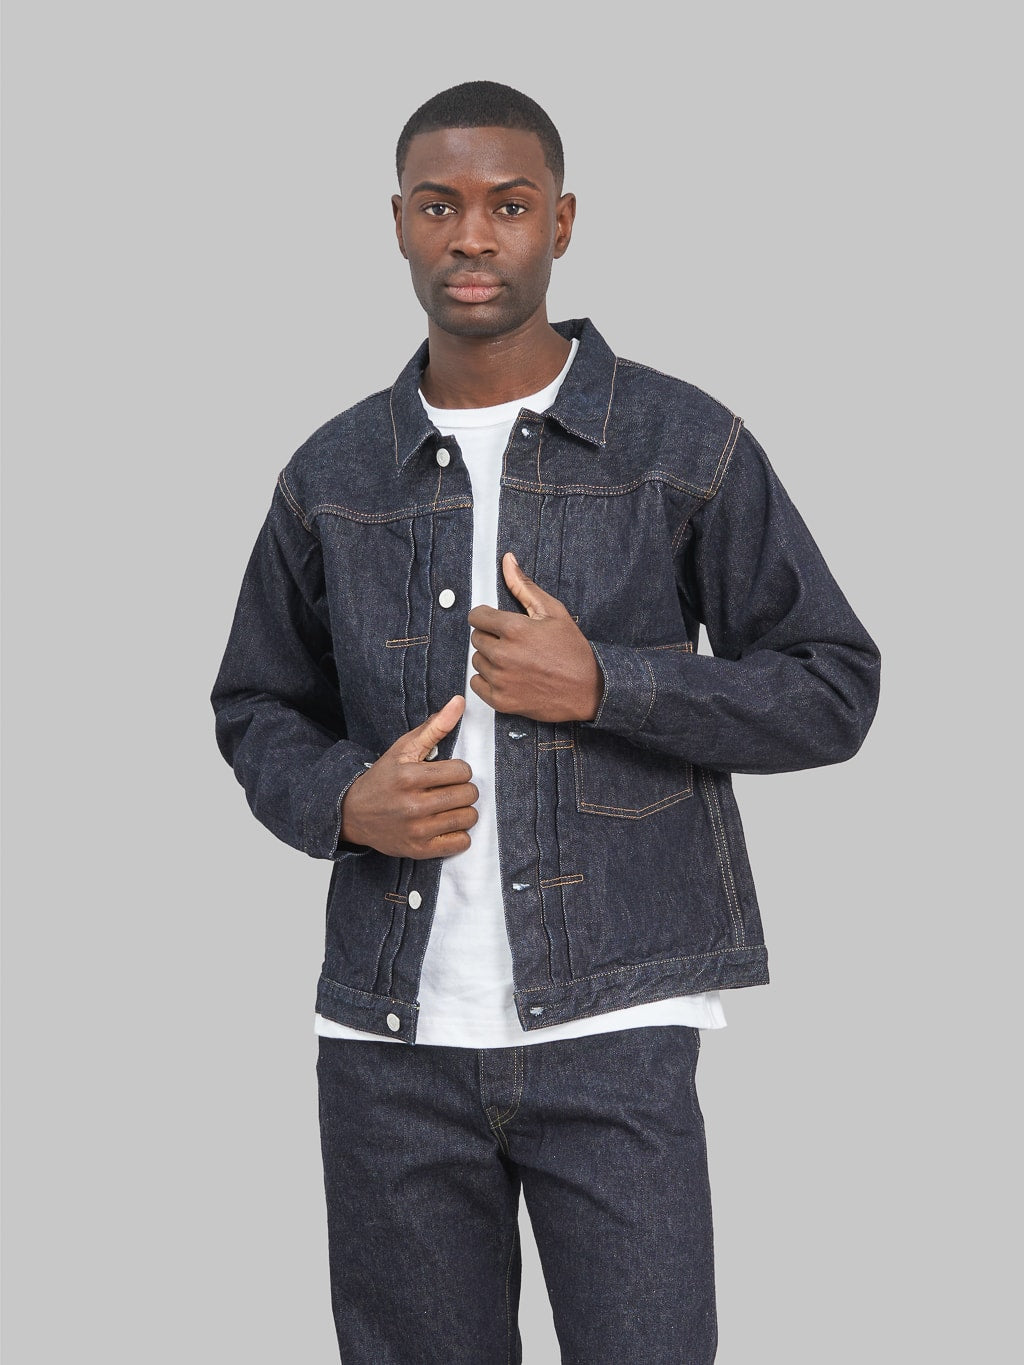 tcb 30s denim jacket opened casual fit